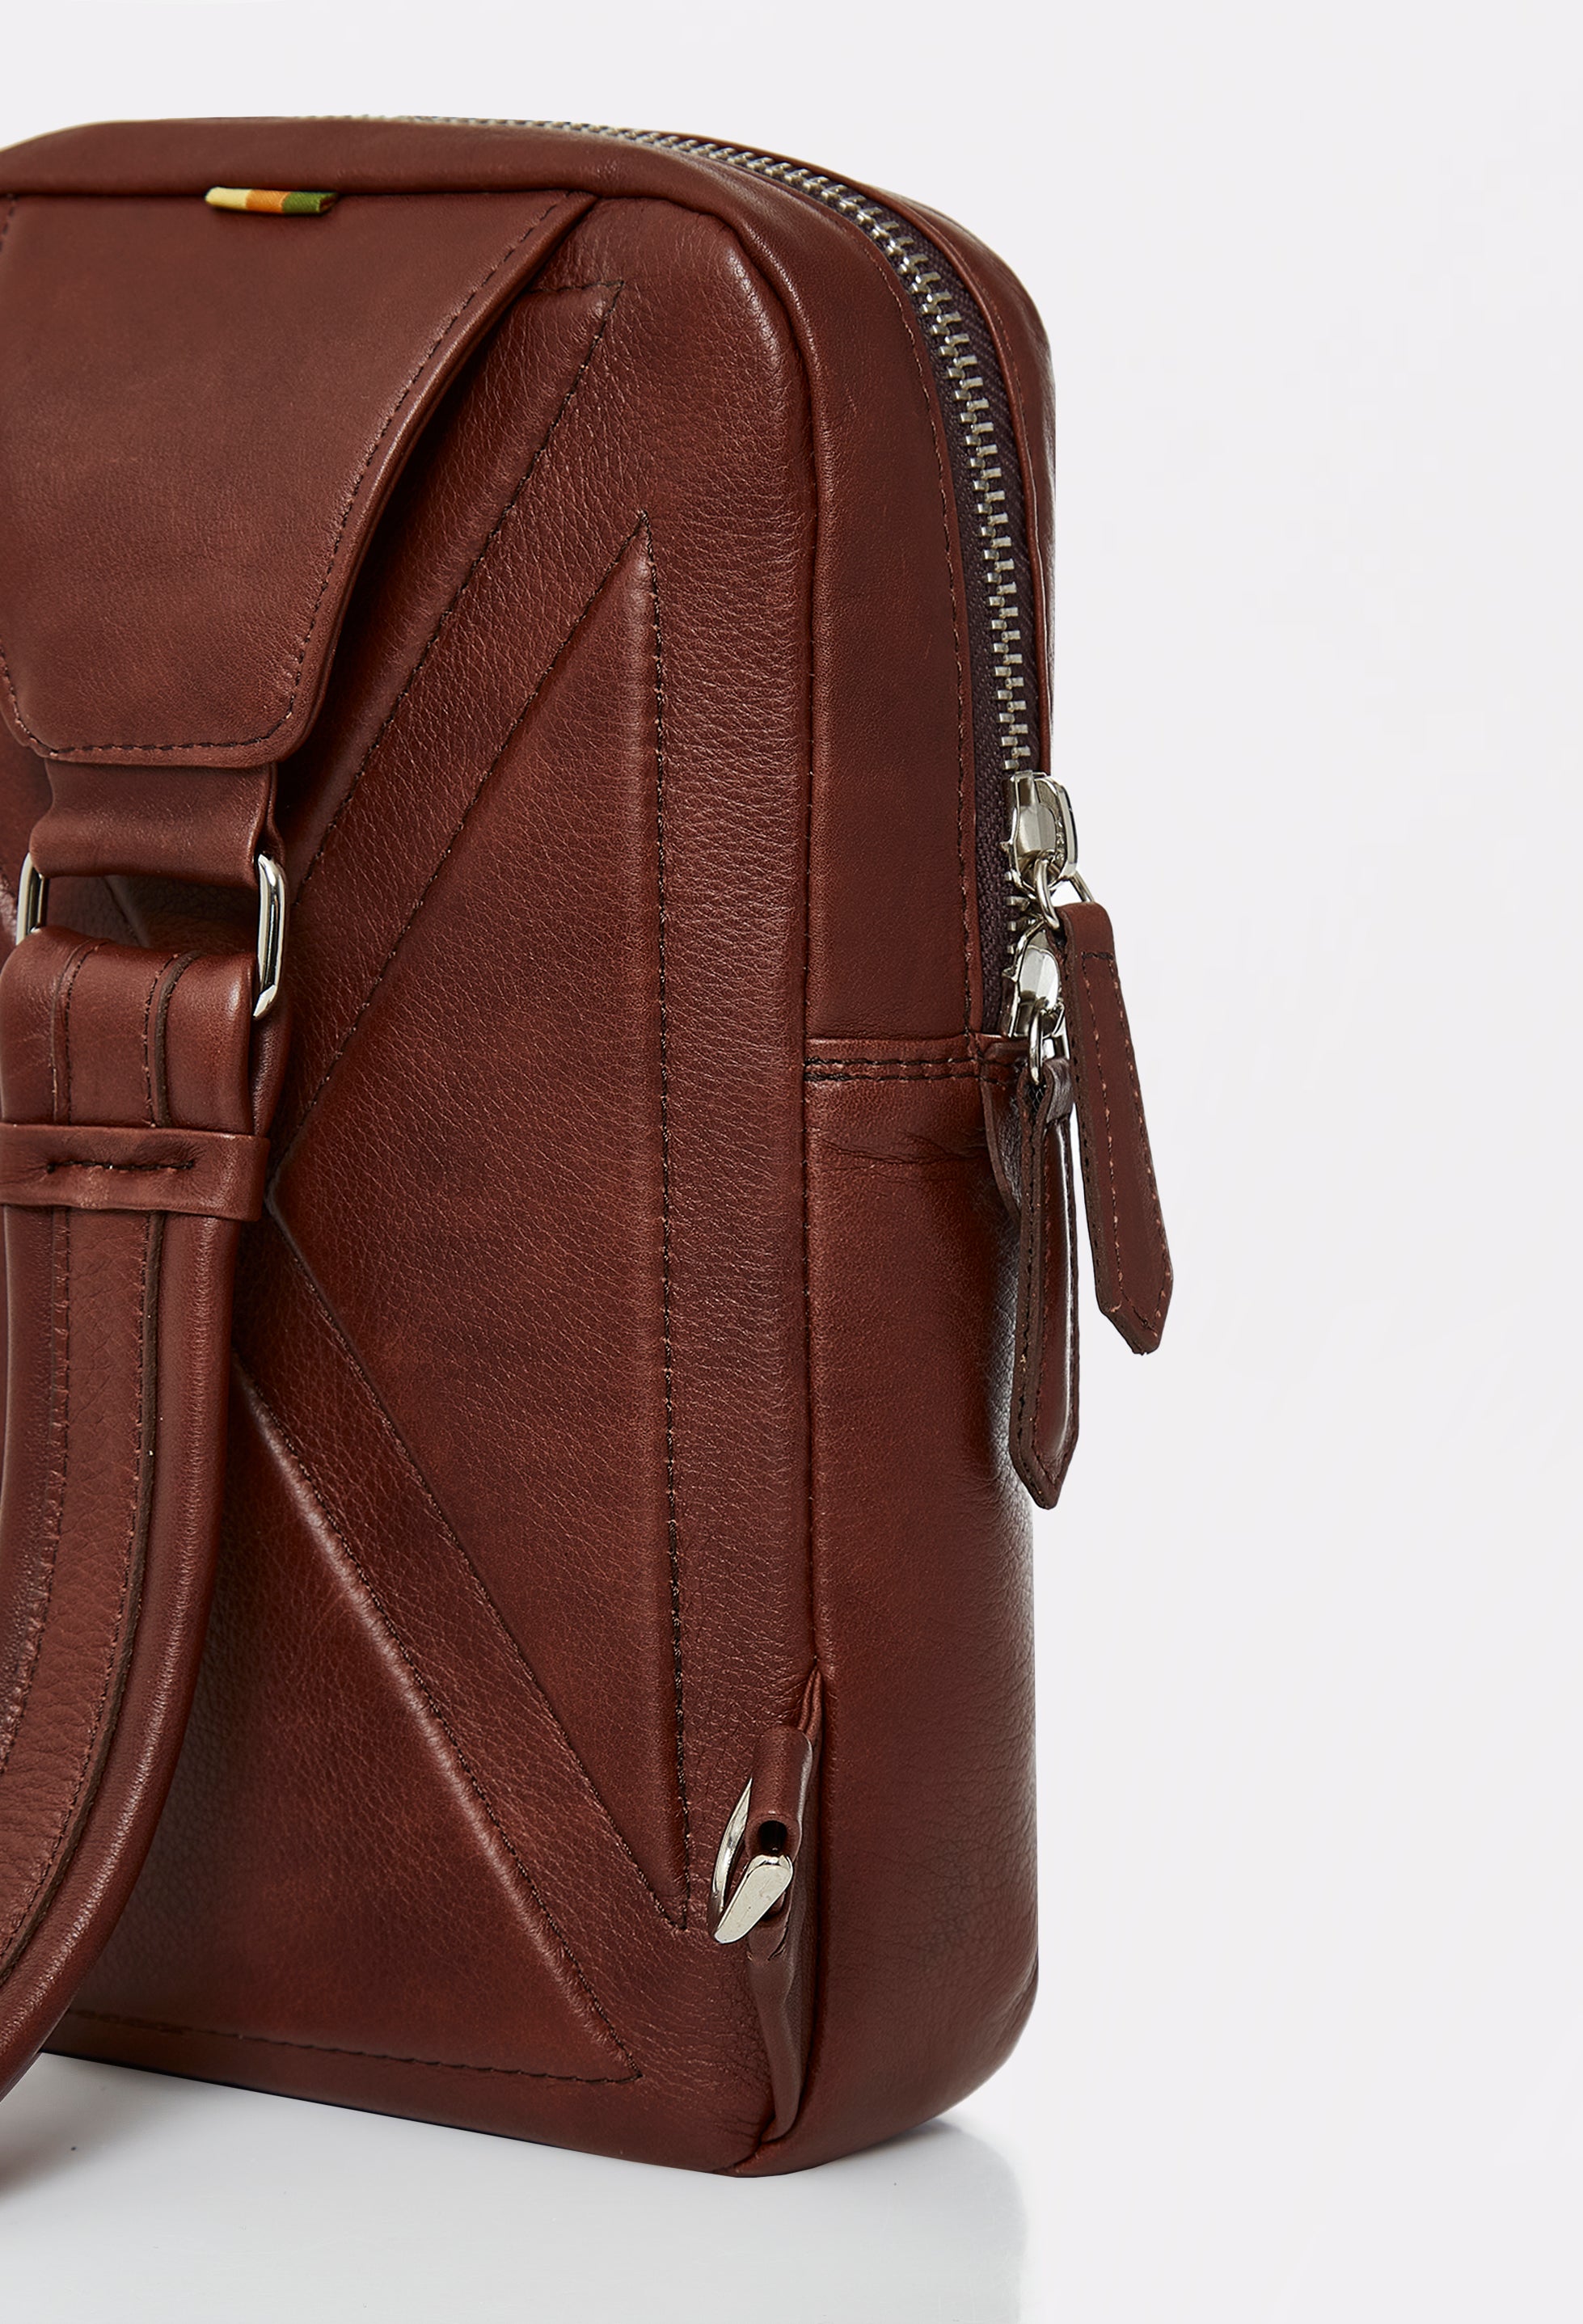 Partial photo of a Coffee Leather Sling Bag Salerno with ergonomically shaped rear and a leather padded and adjustable strap.